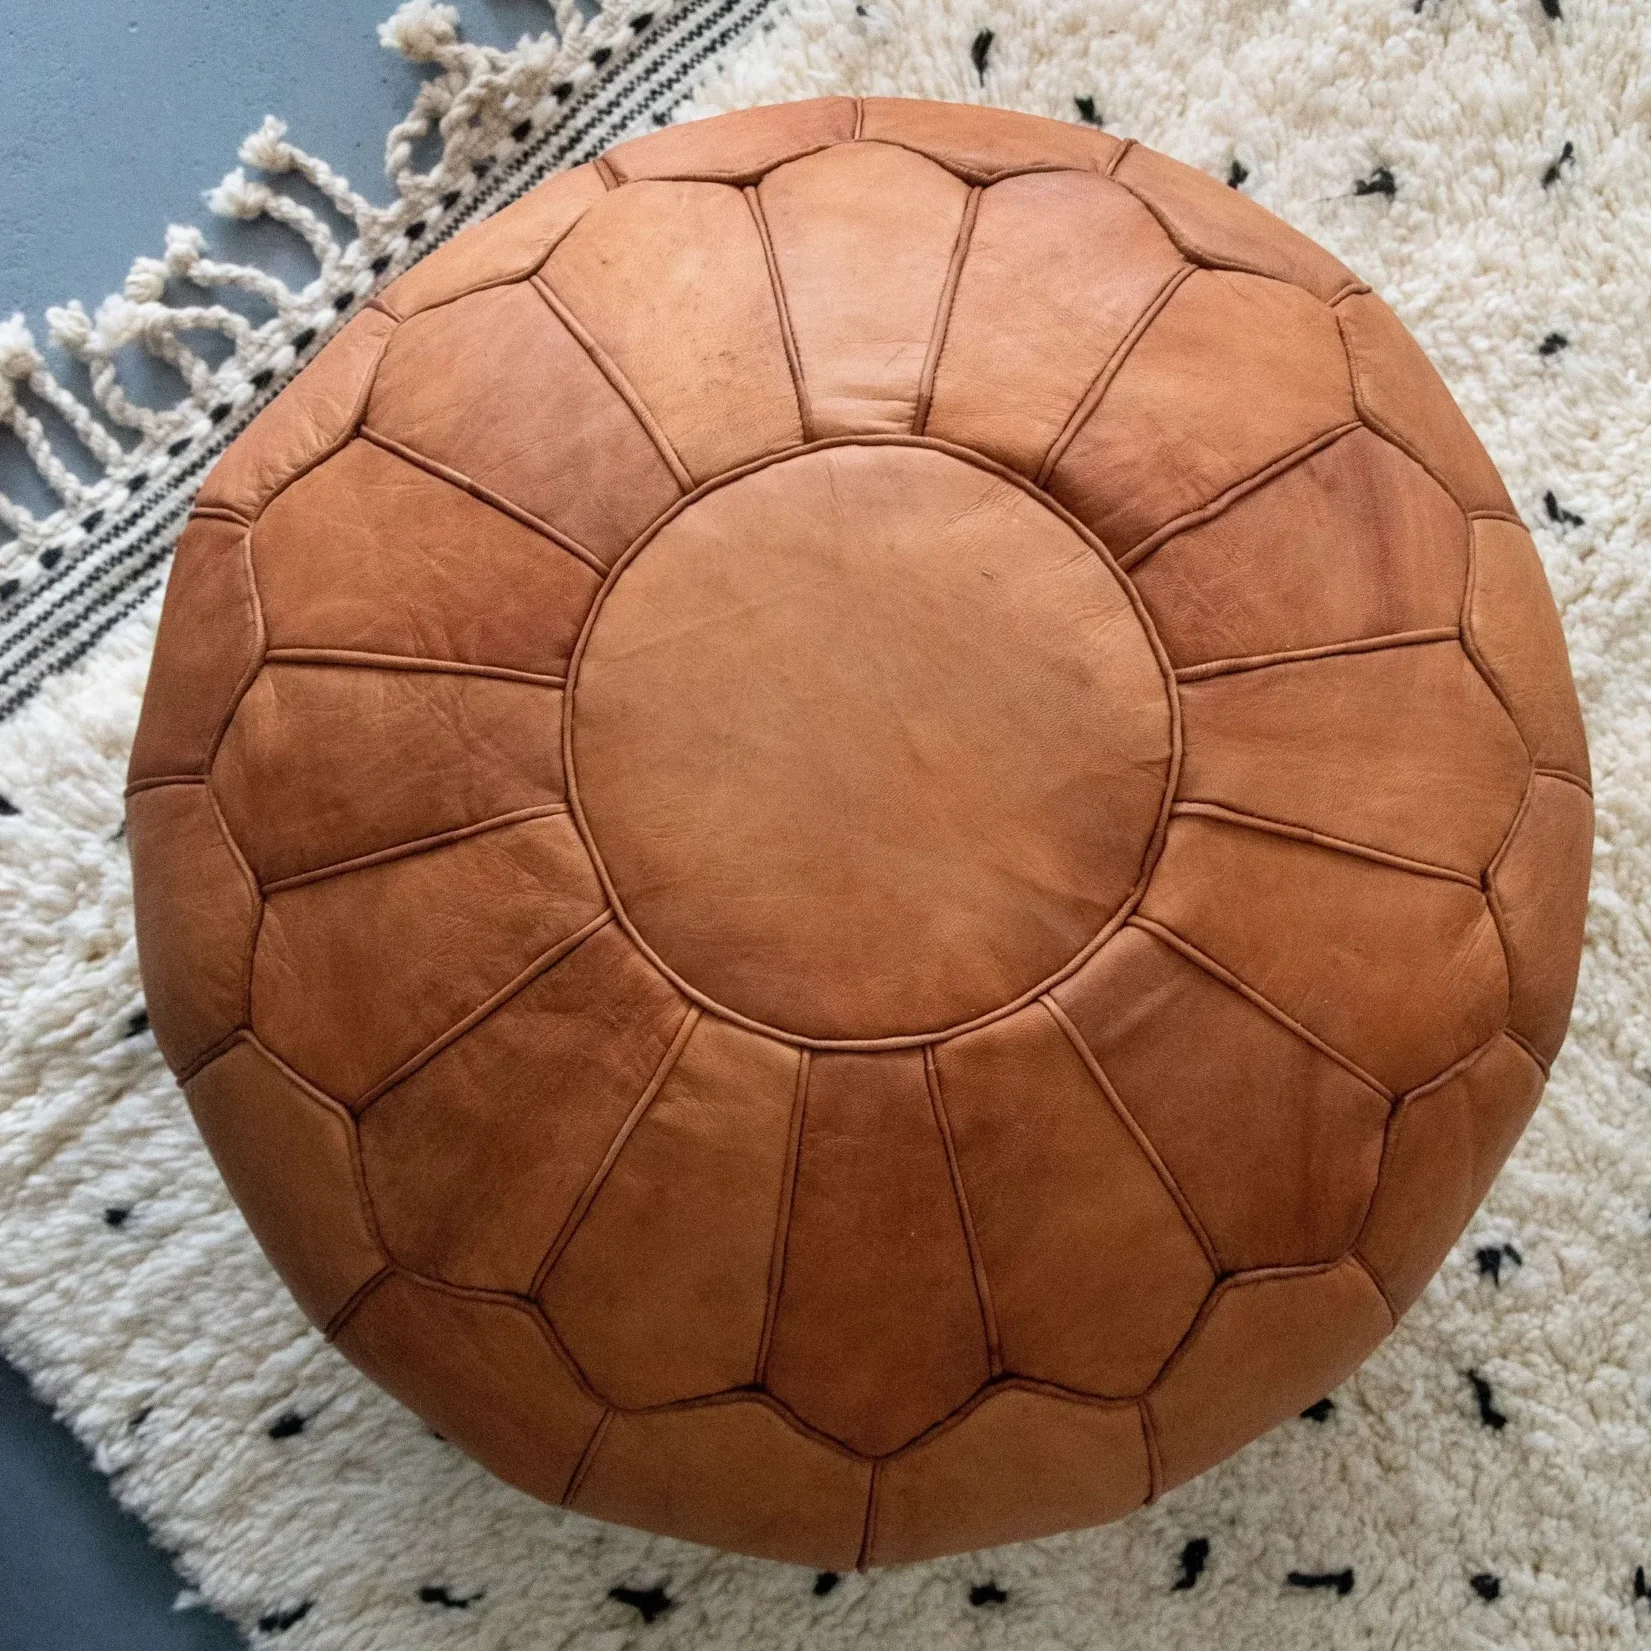 Moroccan Leather Cognac Pouf Handmade
The Art of Moroccan Leather Poufs A Deep Dive